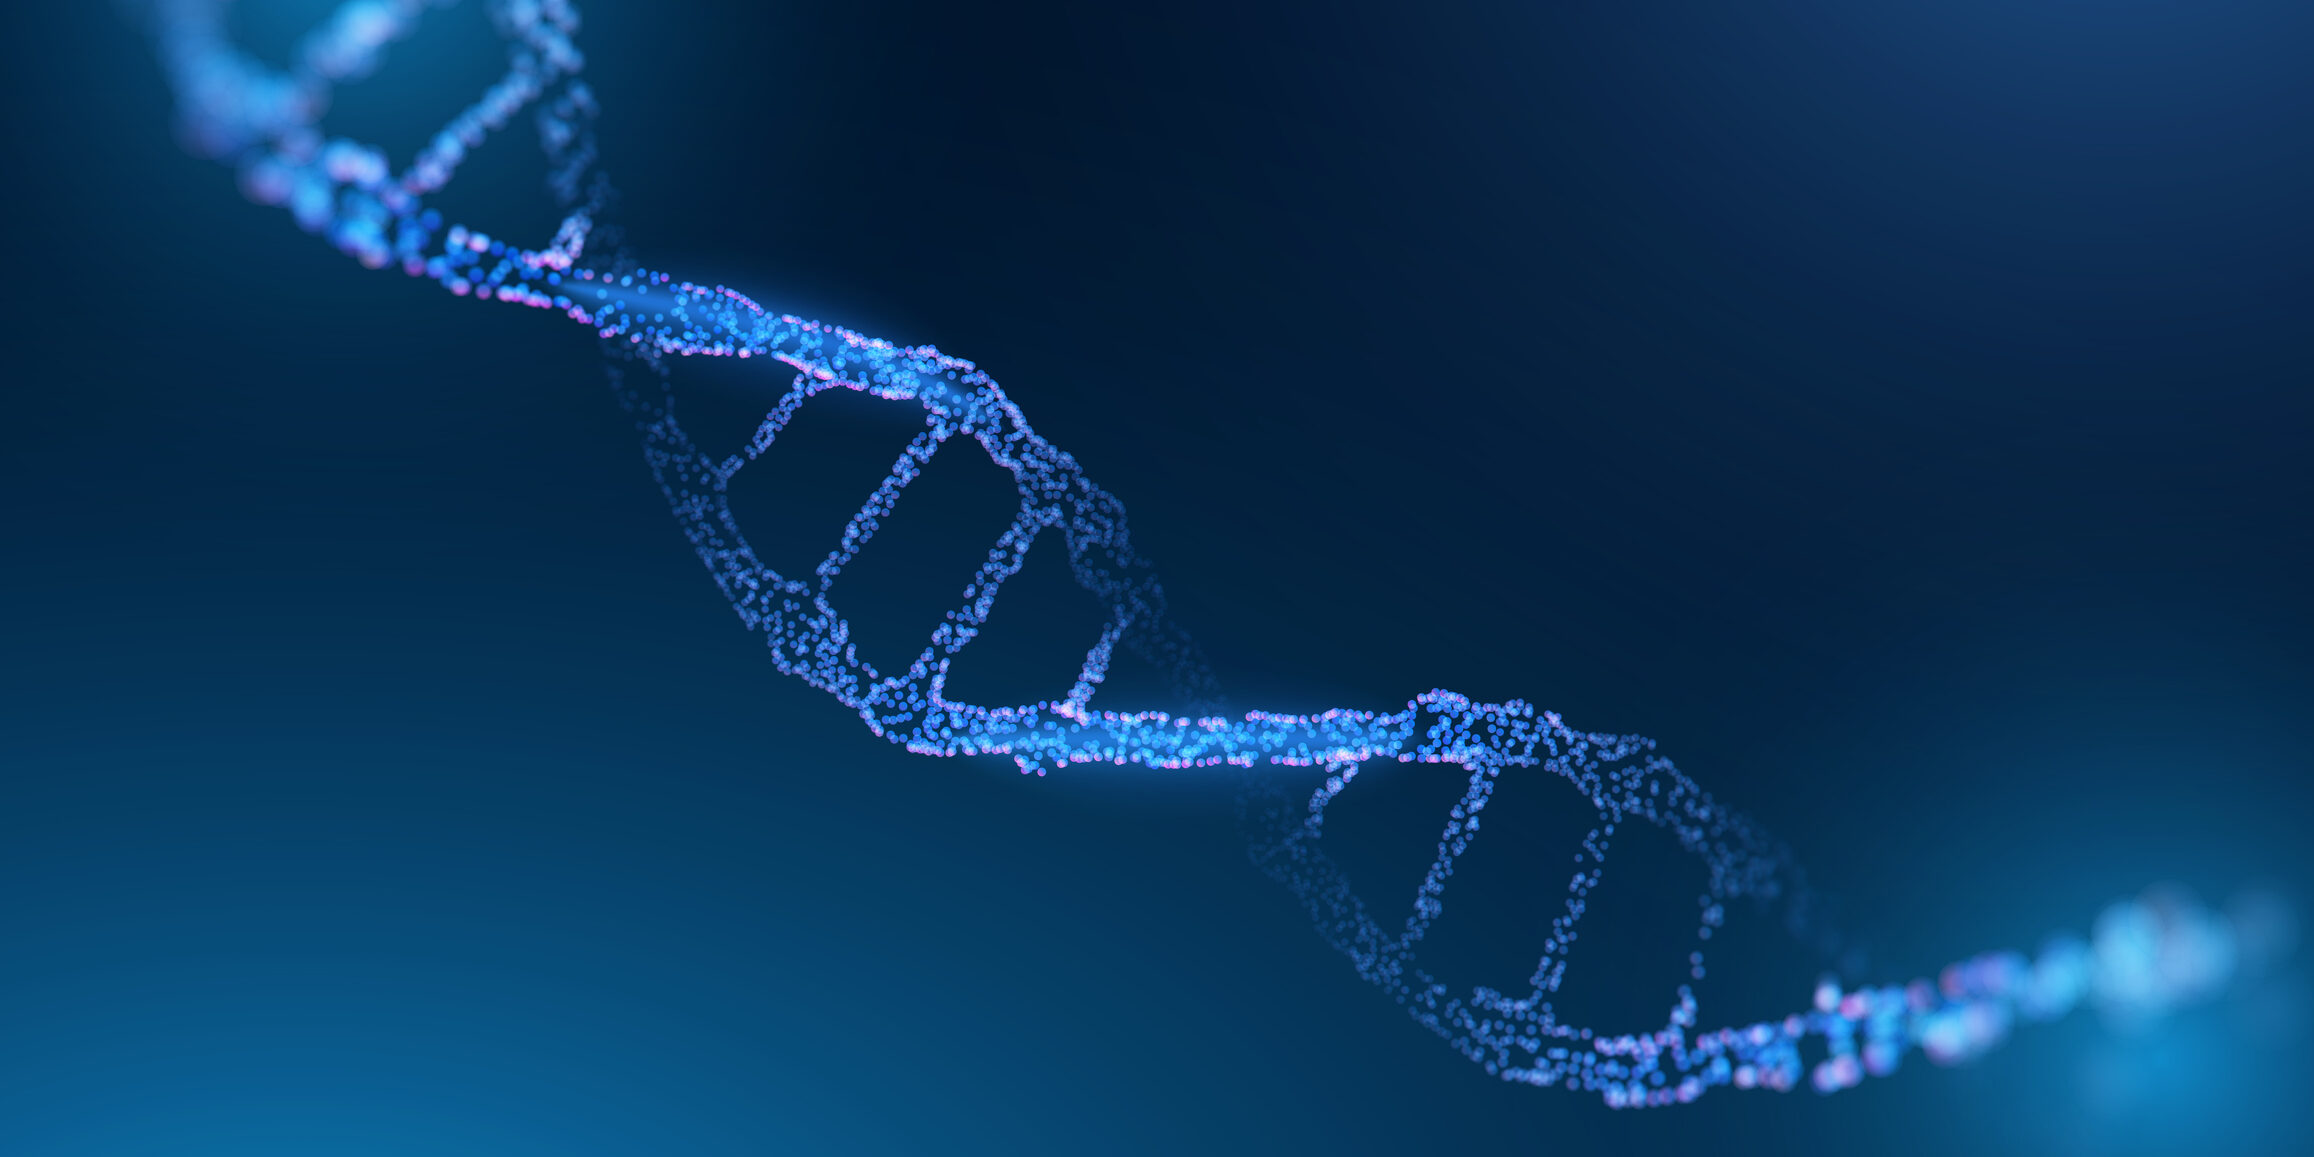 A dark blue background with a light blue image of the DNA double helix